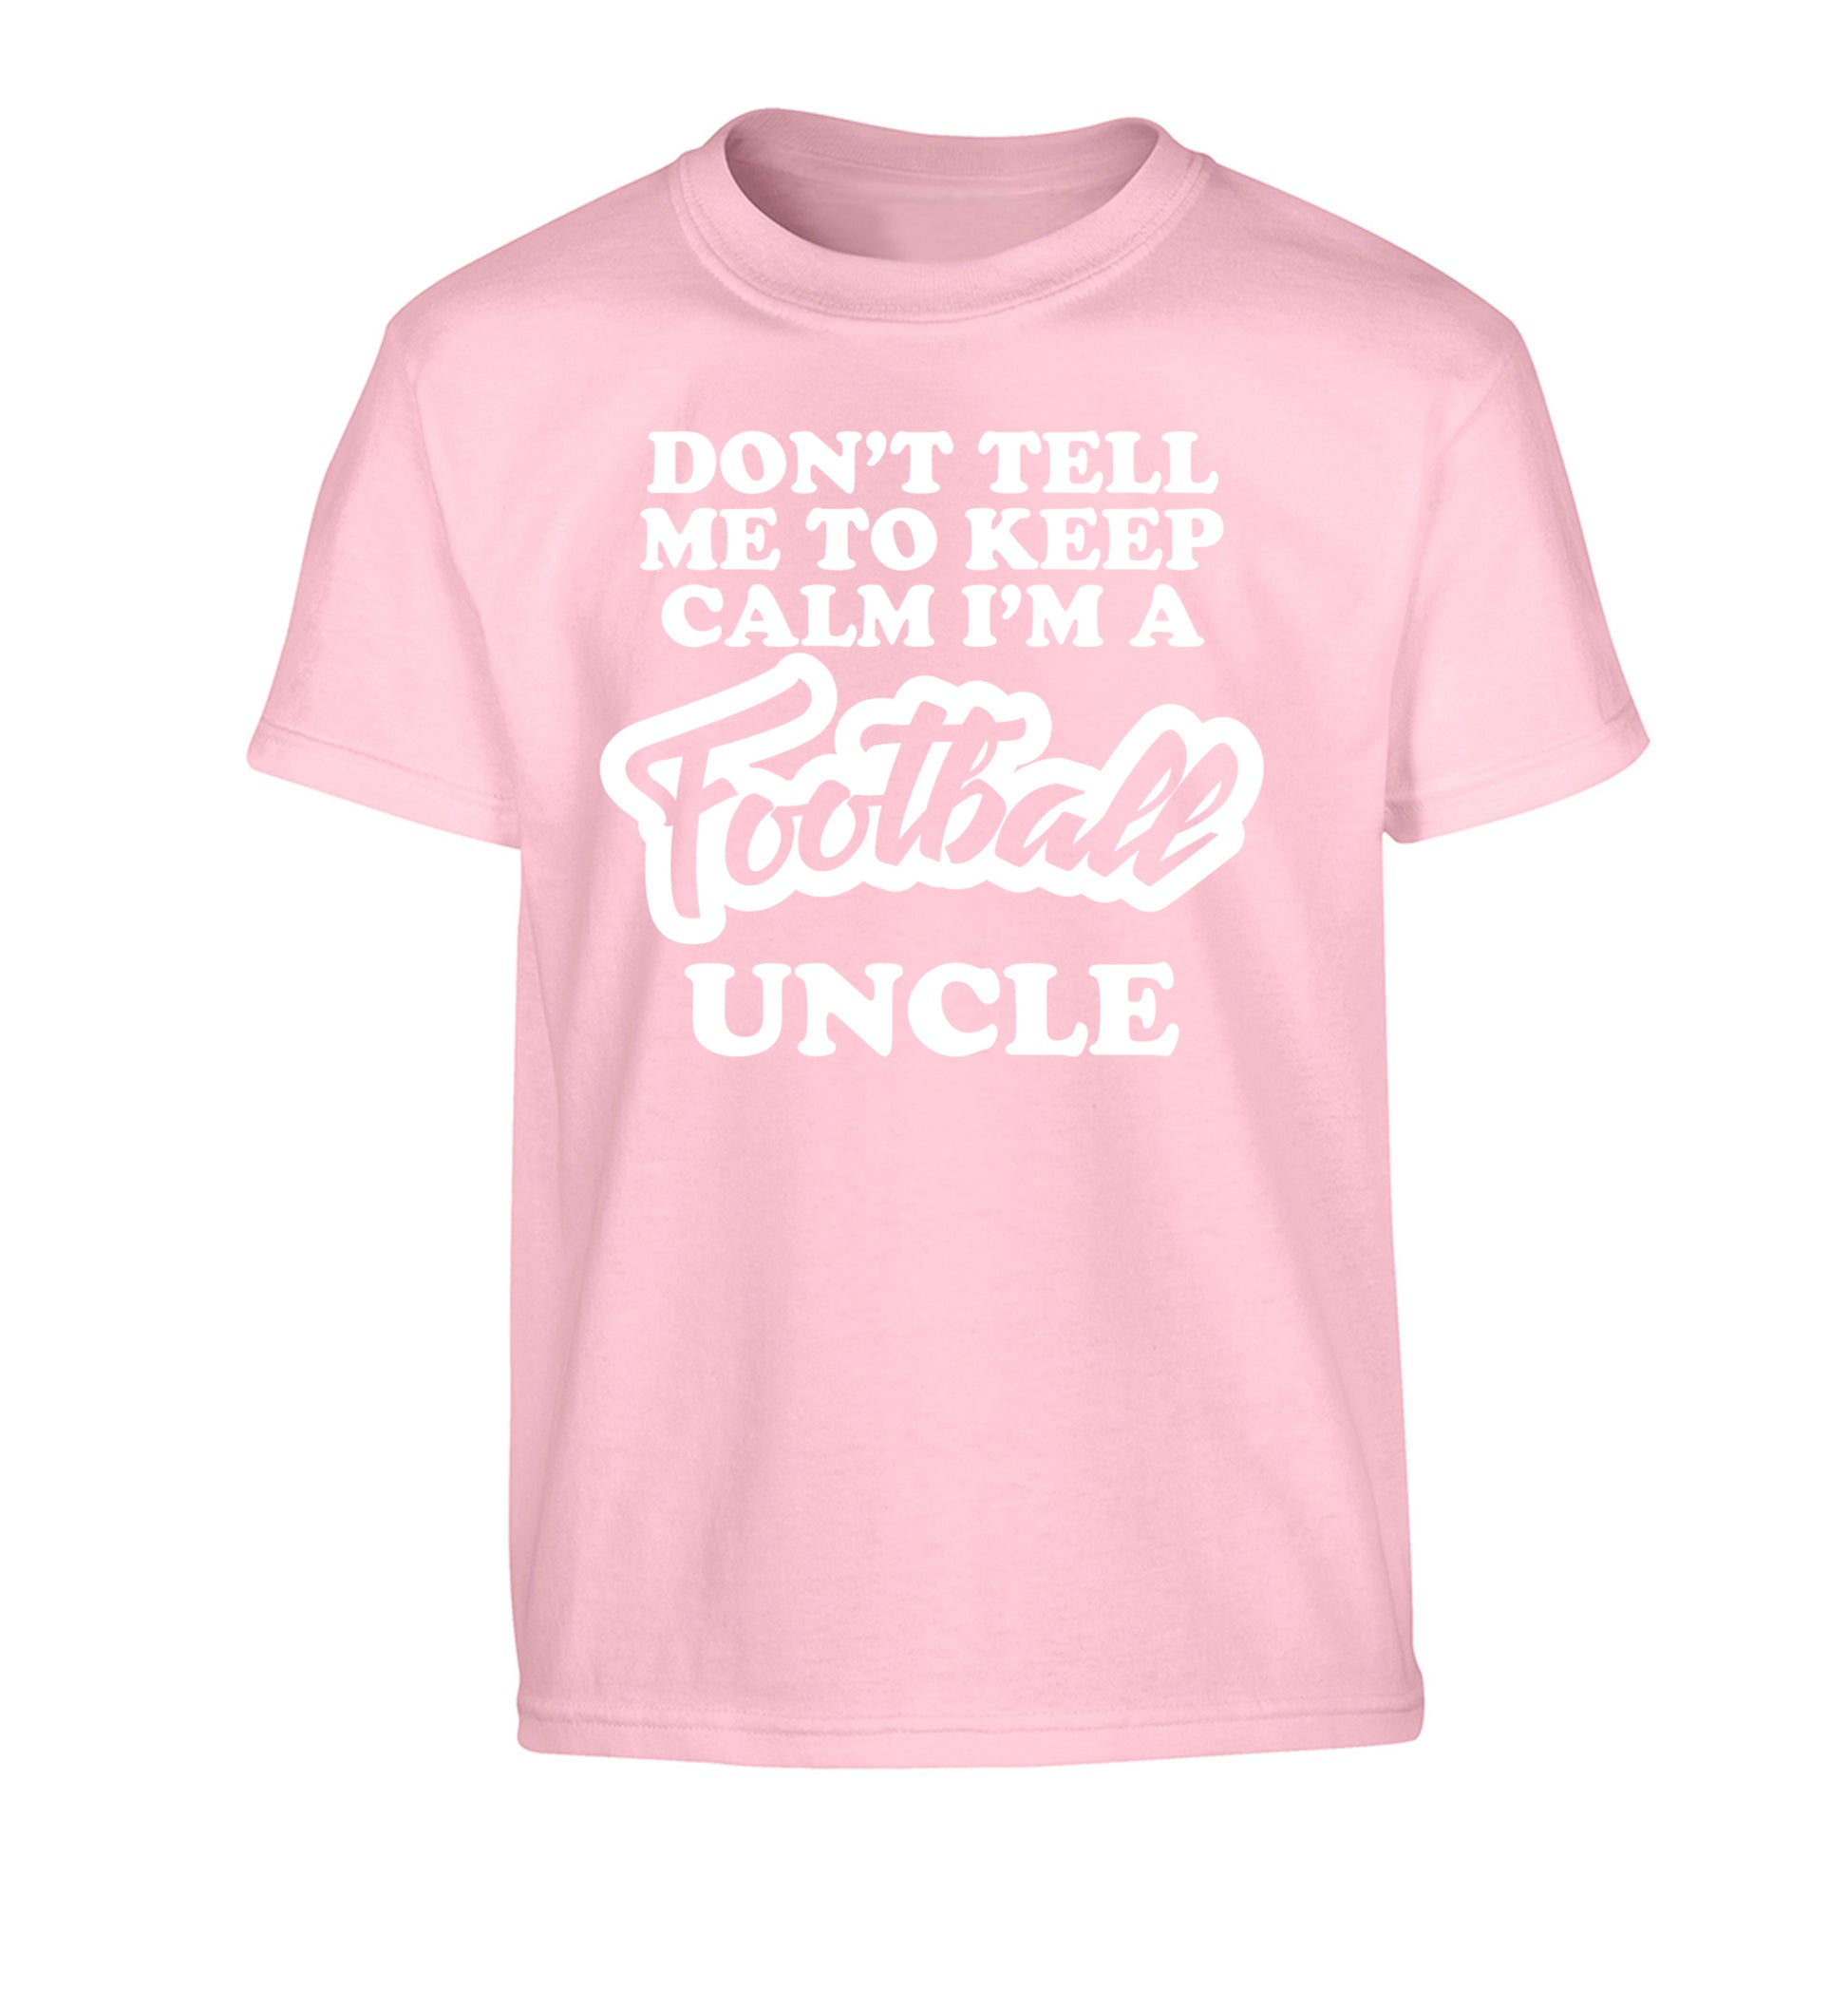 Don't tell me to keep calm I'm a football uncle Children's light pink Tshirt 12-14 Years